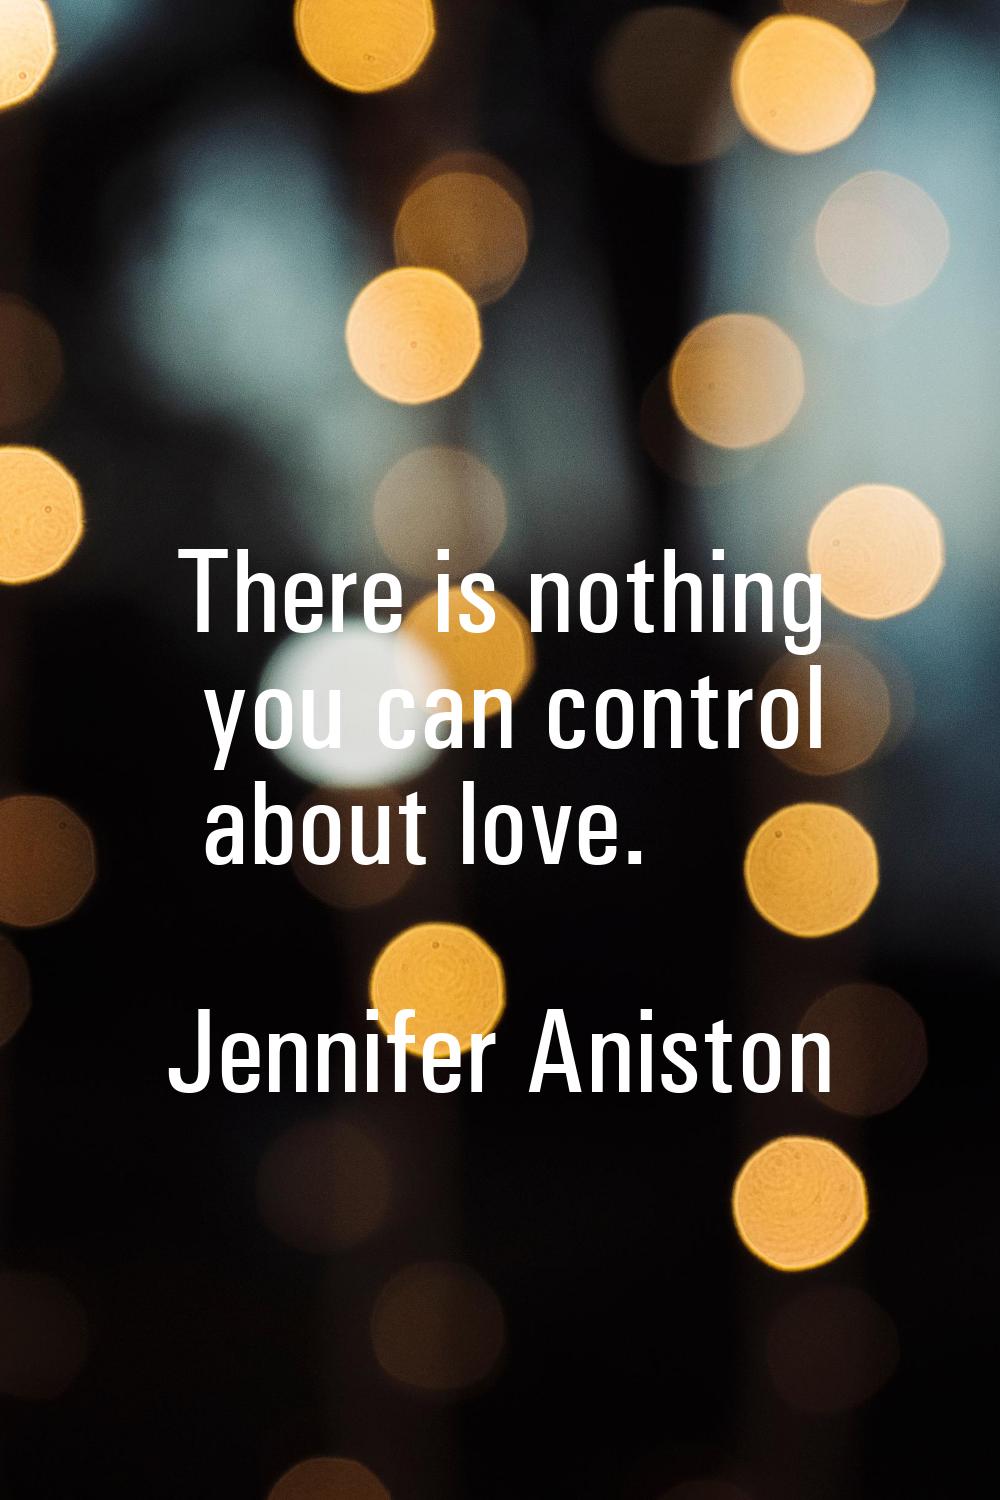 There is nothing you can control about love.